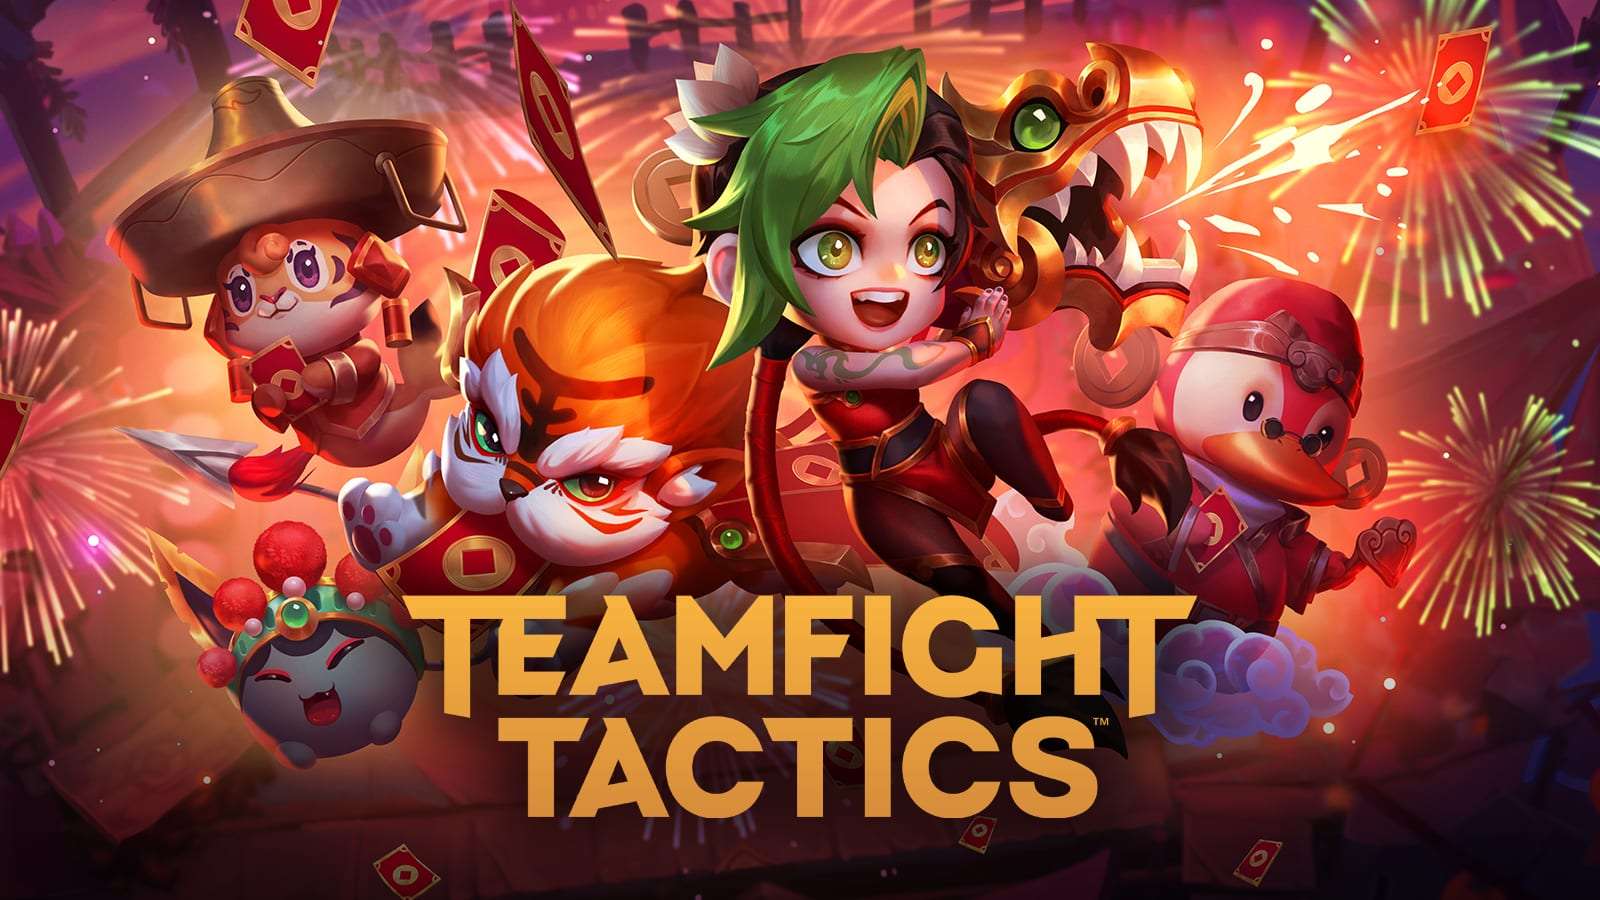 Chibi Firecracker Jinx tactician celebrating in TFT Gifts of the golden lantern event